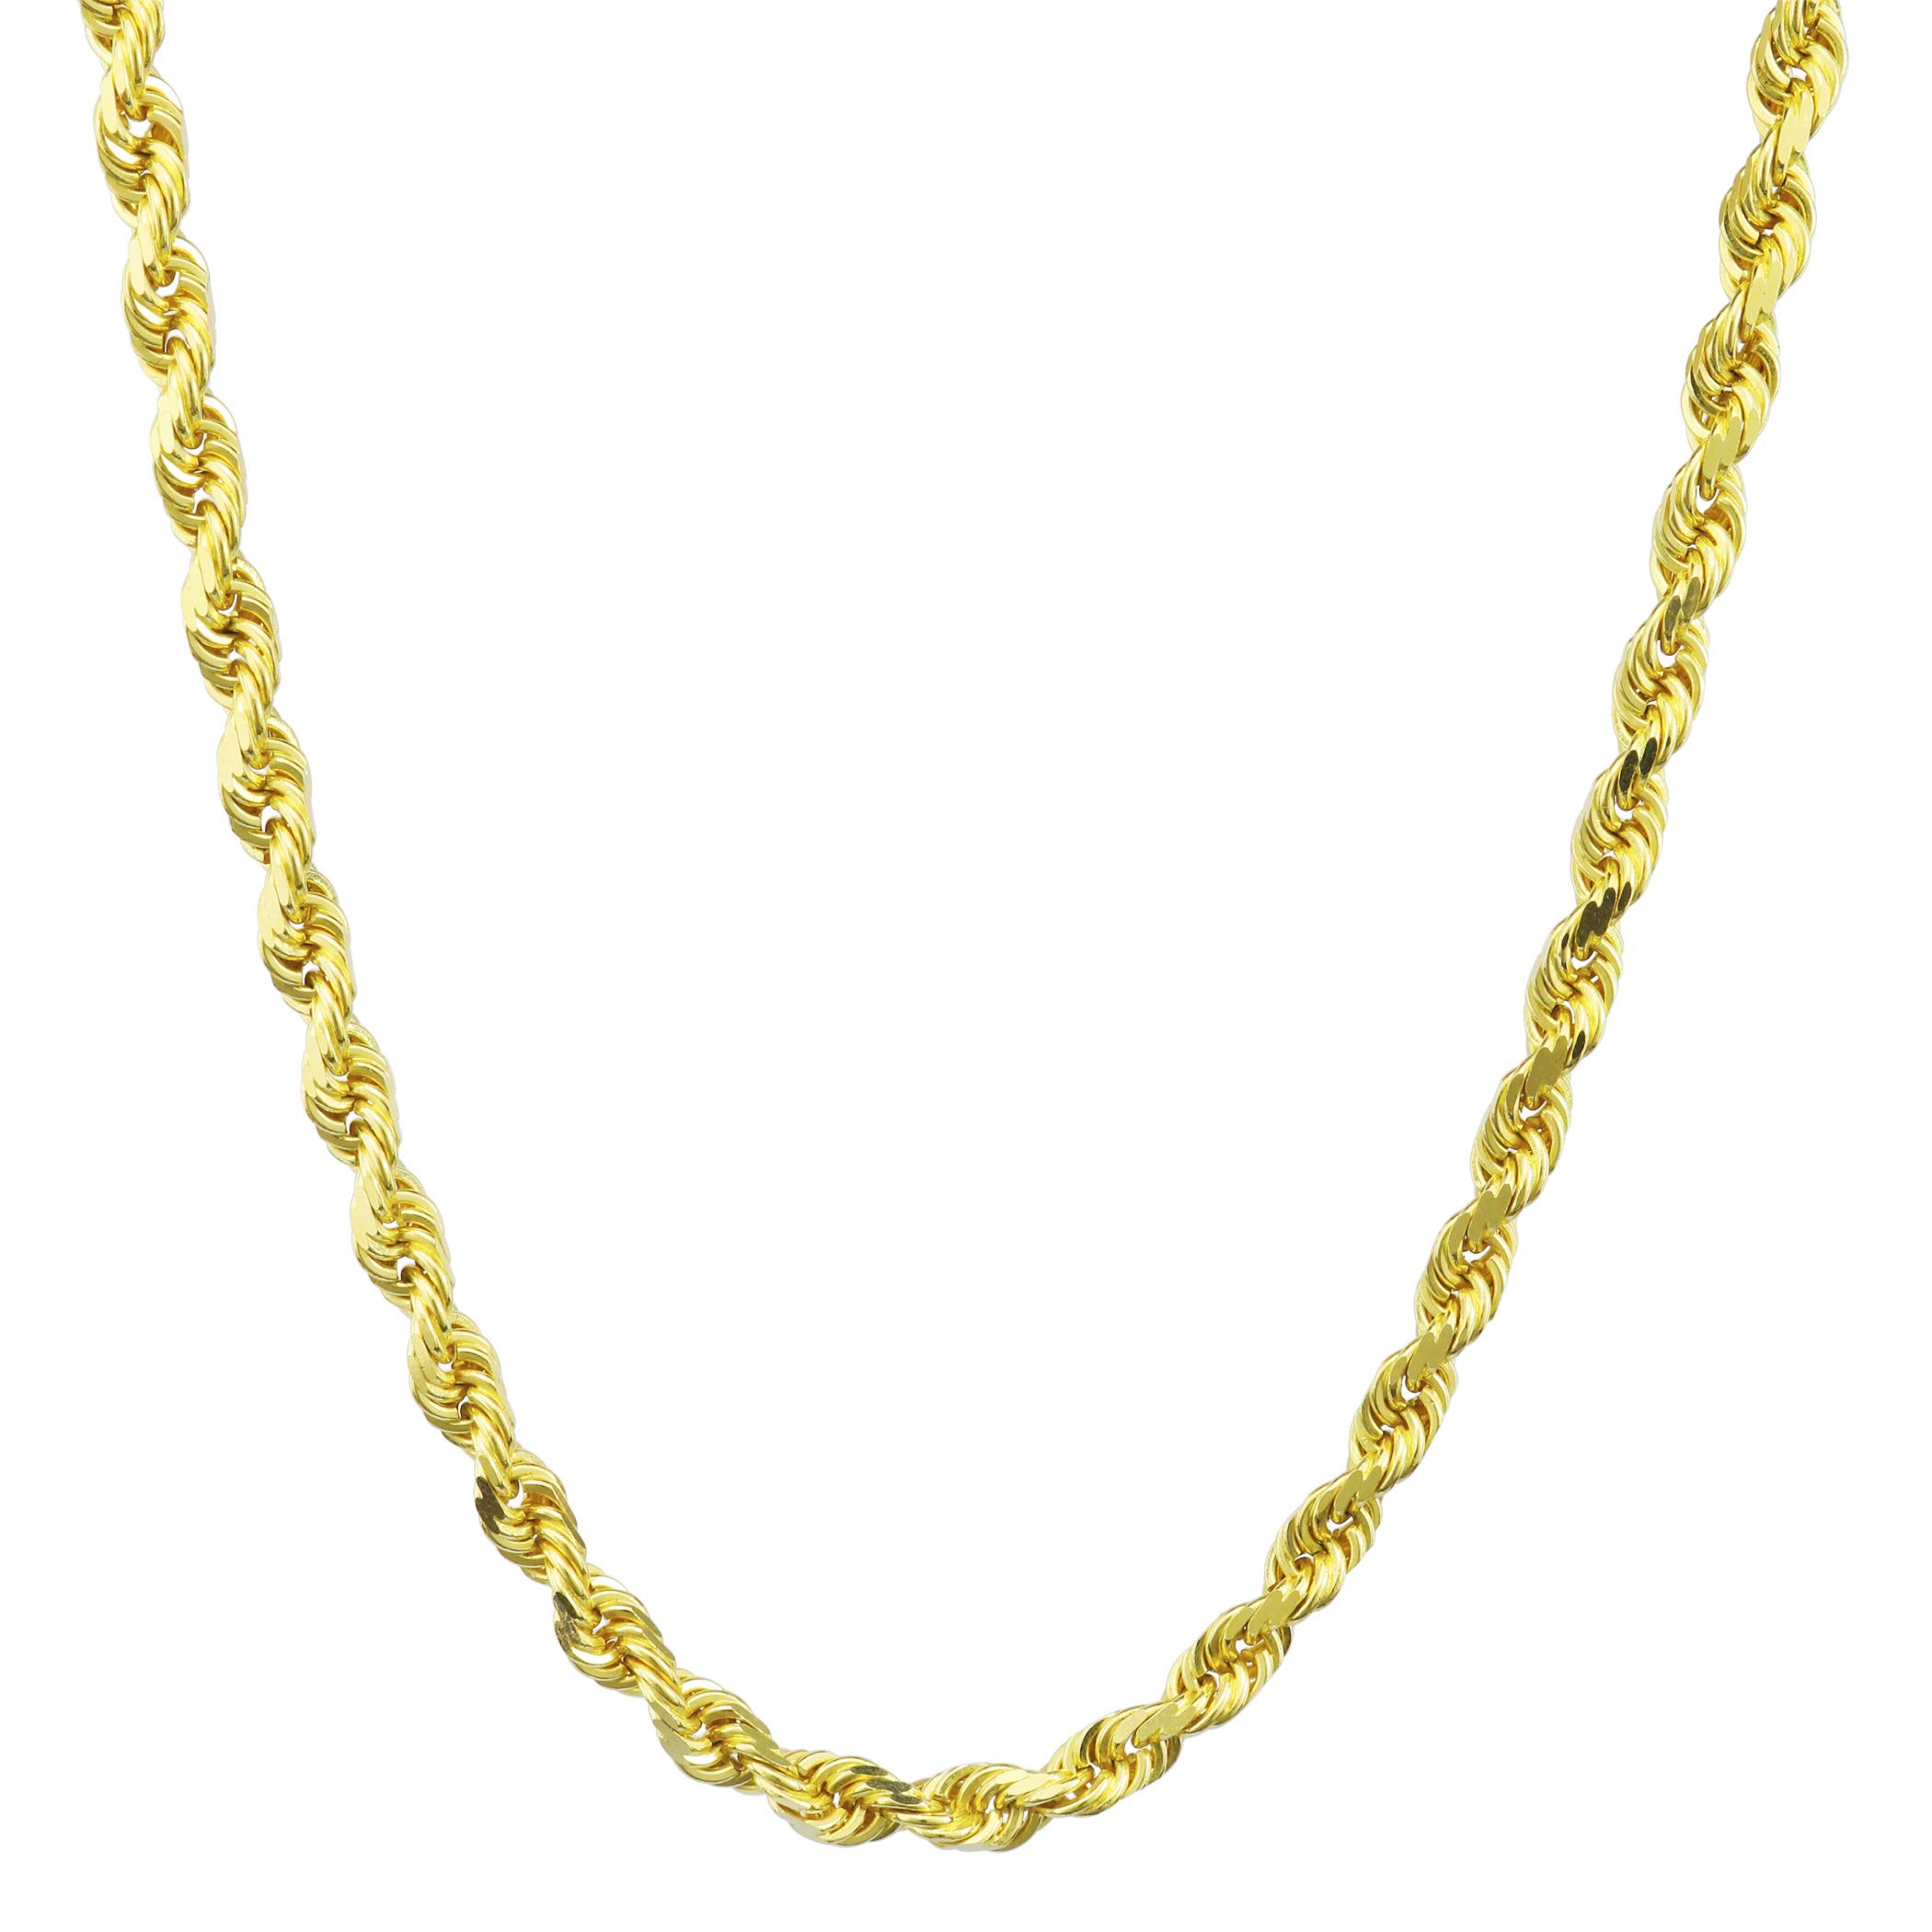 Nuragold 14k Yellow Gold 5mm Solid Rope Chain Diamond Cut Pendant Necklace, Mens Jewelry Lobster Clasp 20